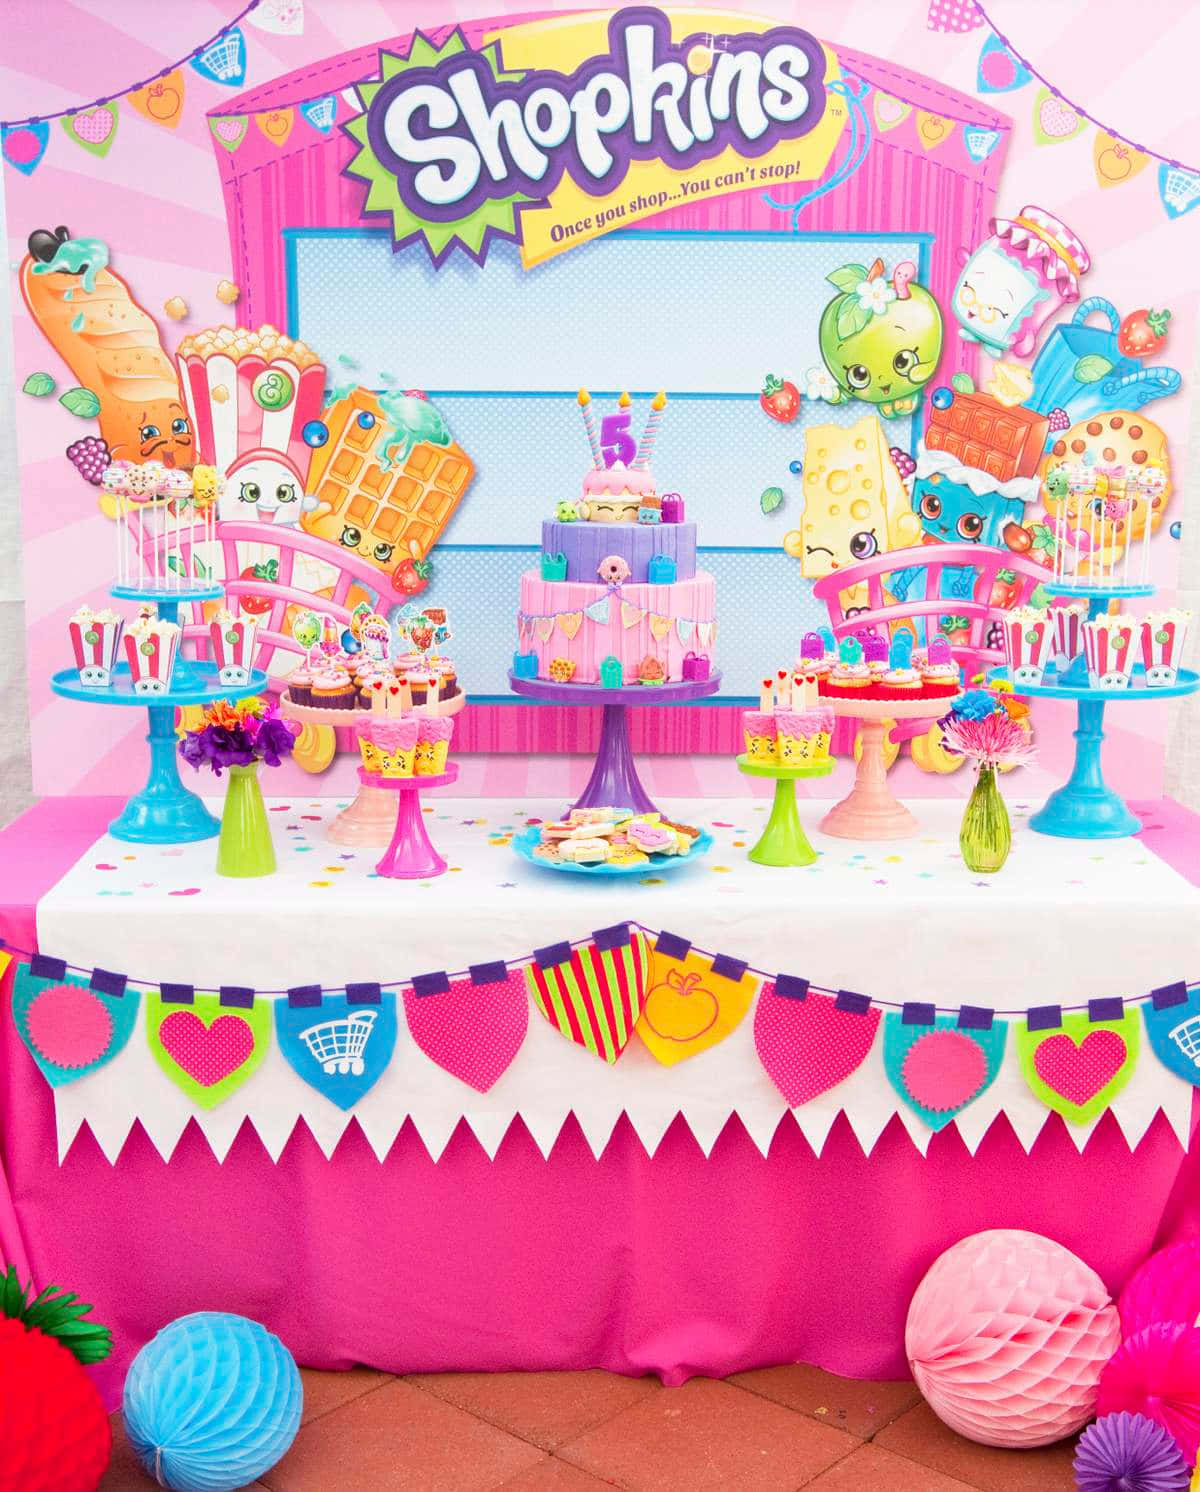 A Delightful Collection of Colorful Shopkins Characters